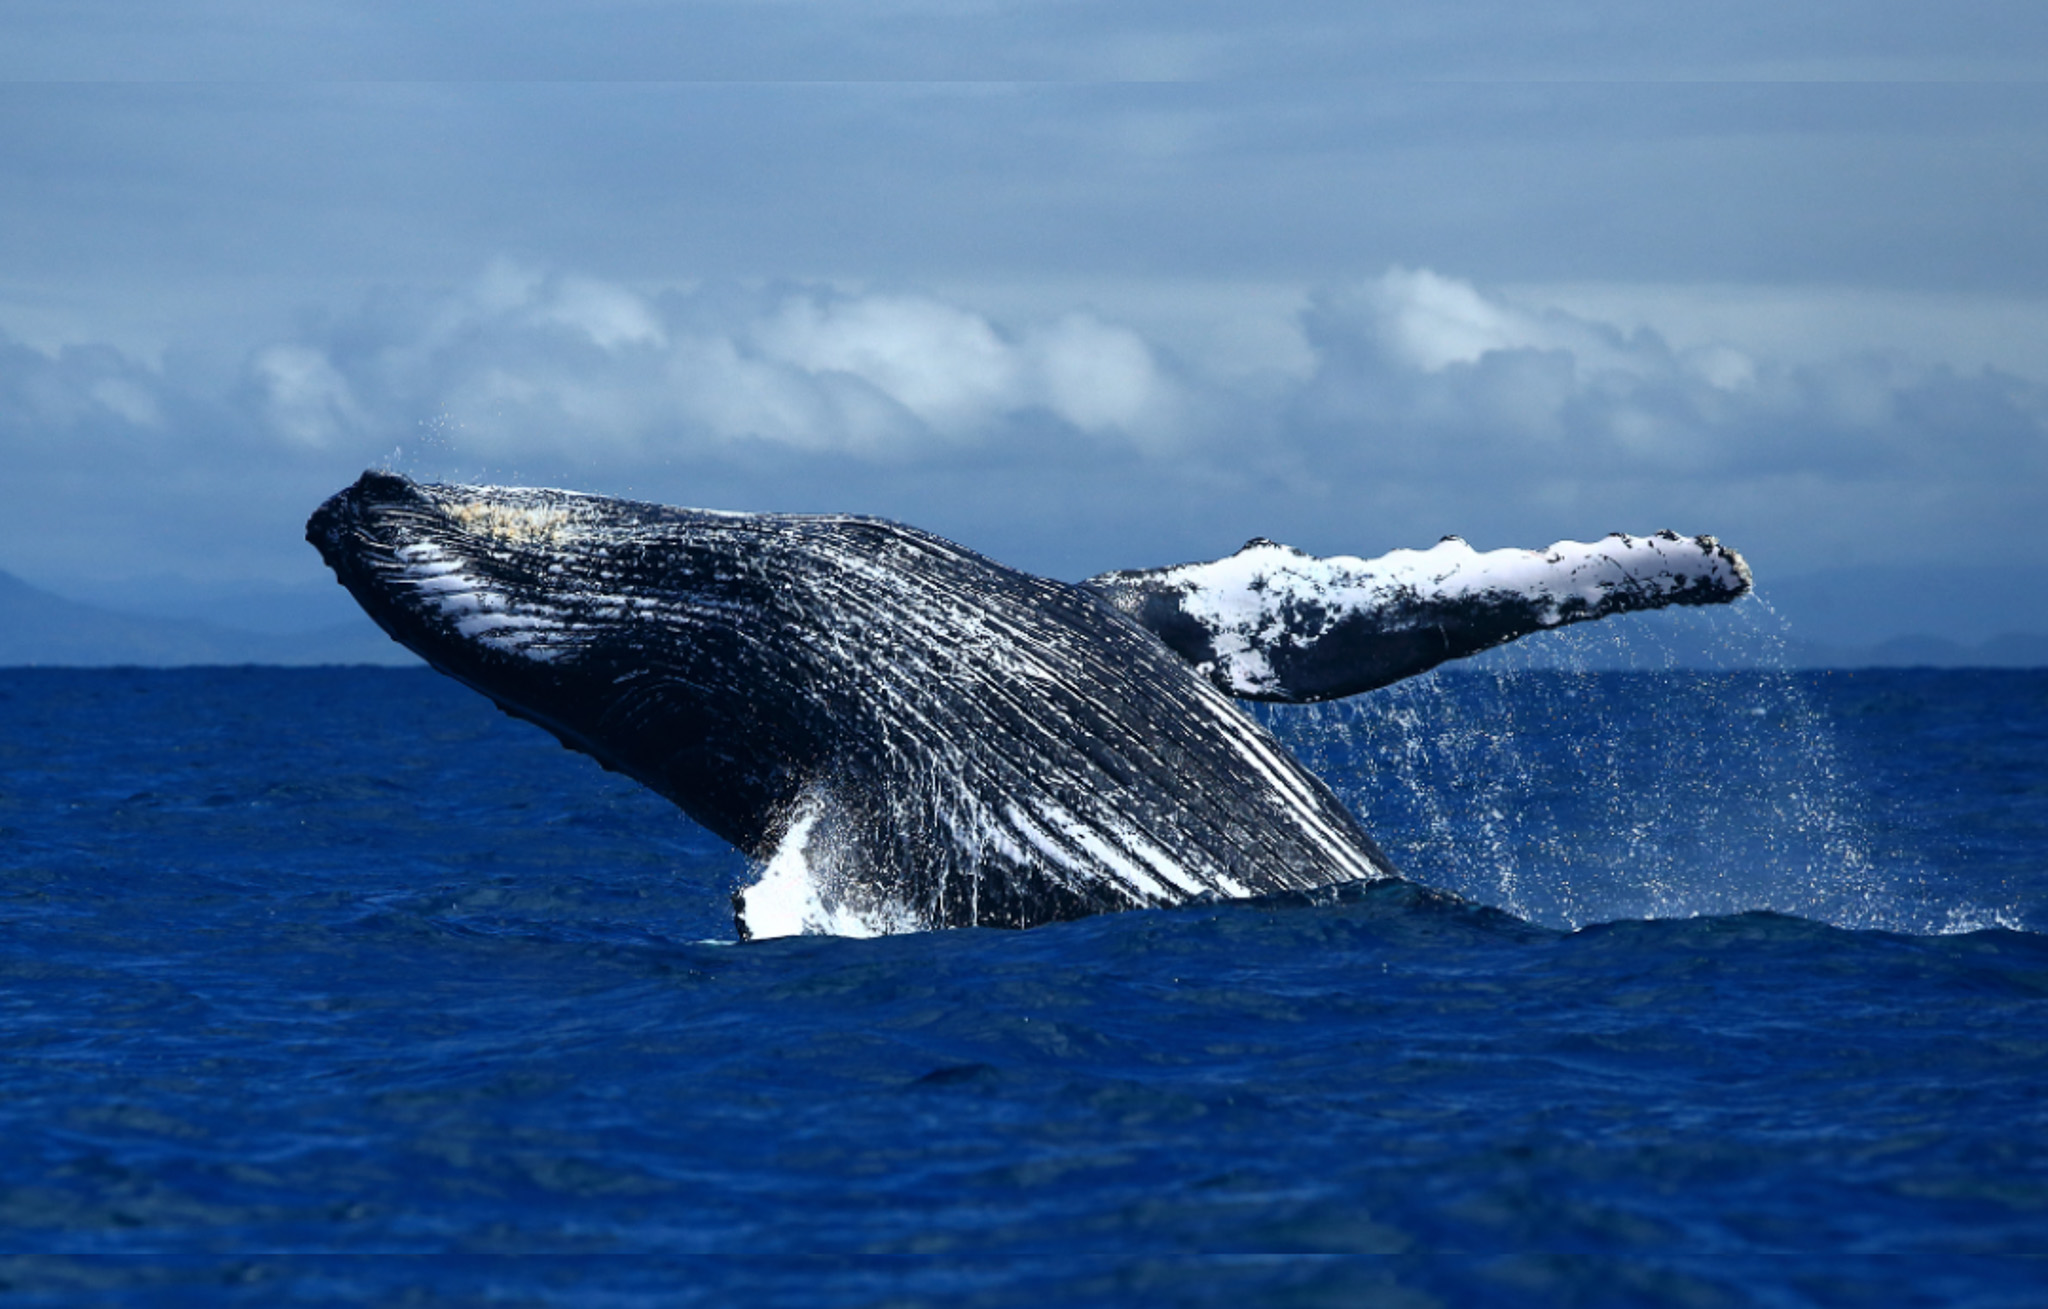 A majestic humpback whale breaching the water's surface, creating a dramatic display of power and grace.